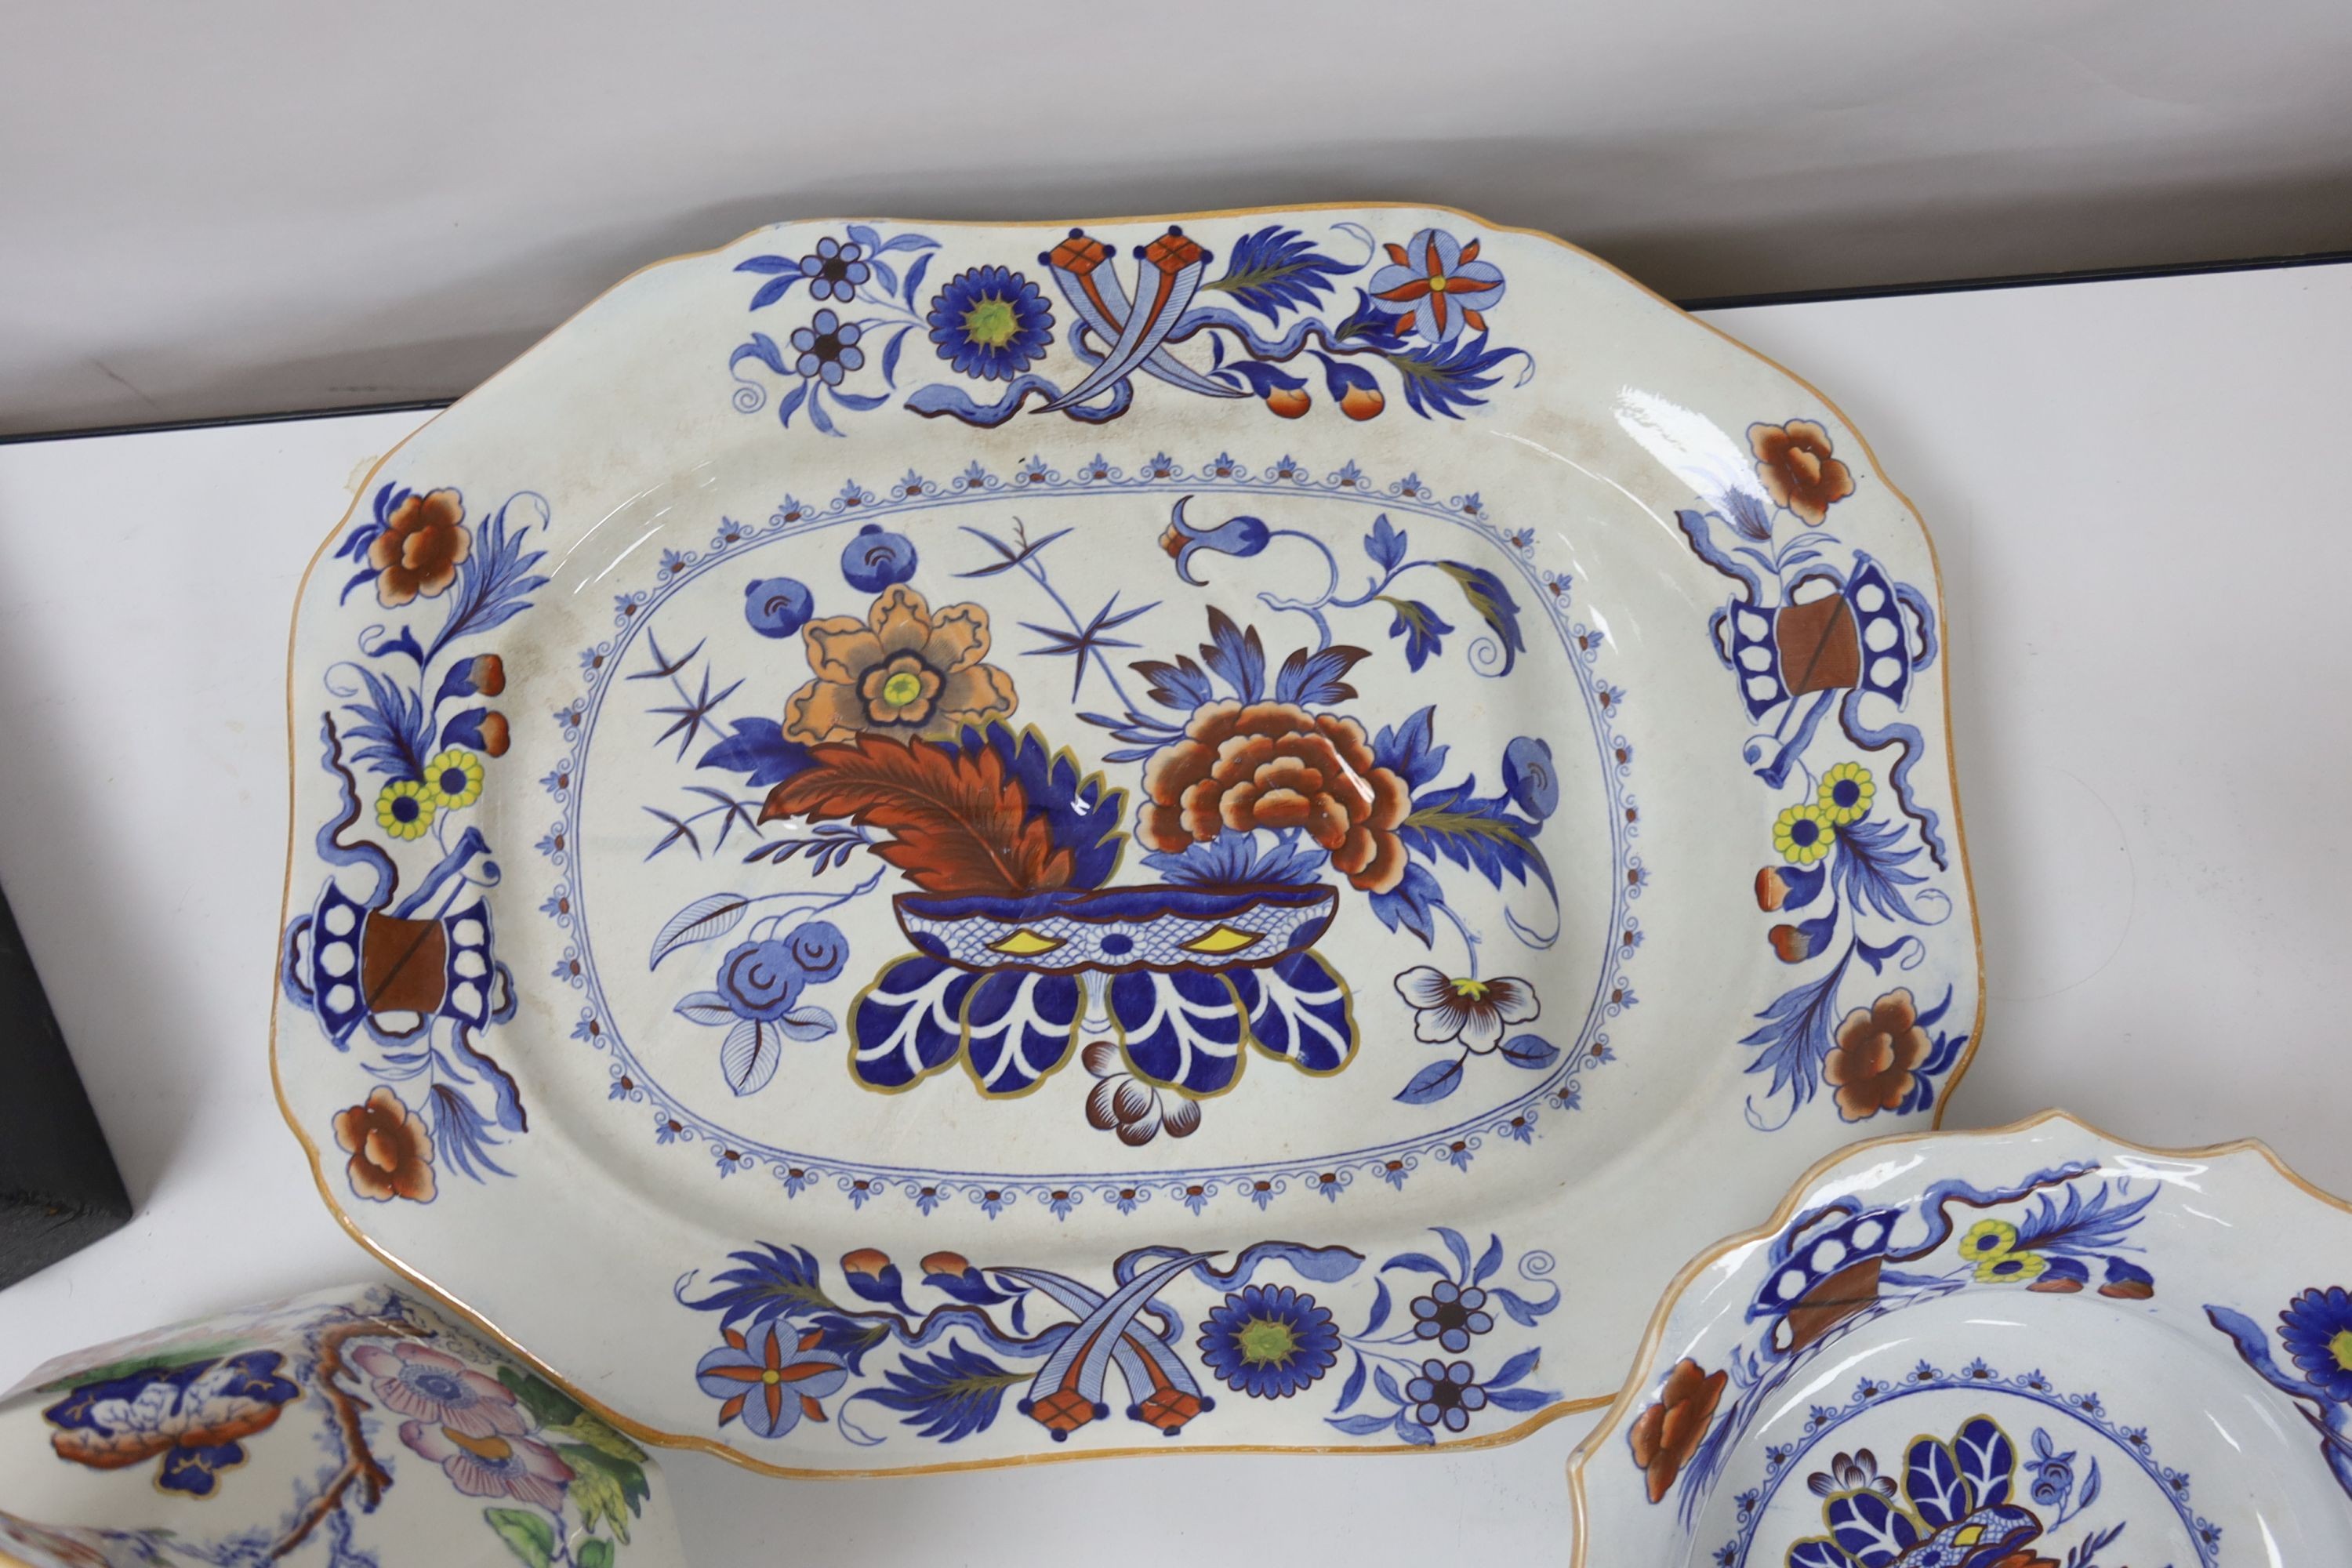 A19th century Ironstone meat platter, jug and 2 tureens, meat platter 48 cms wide.